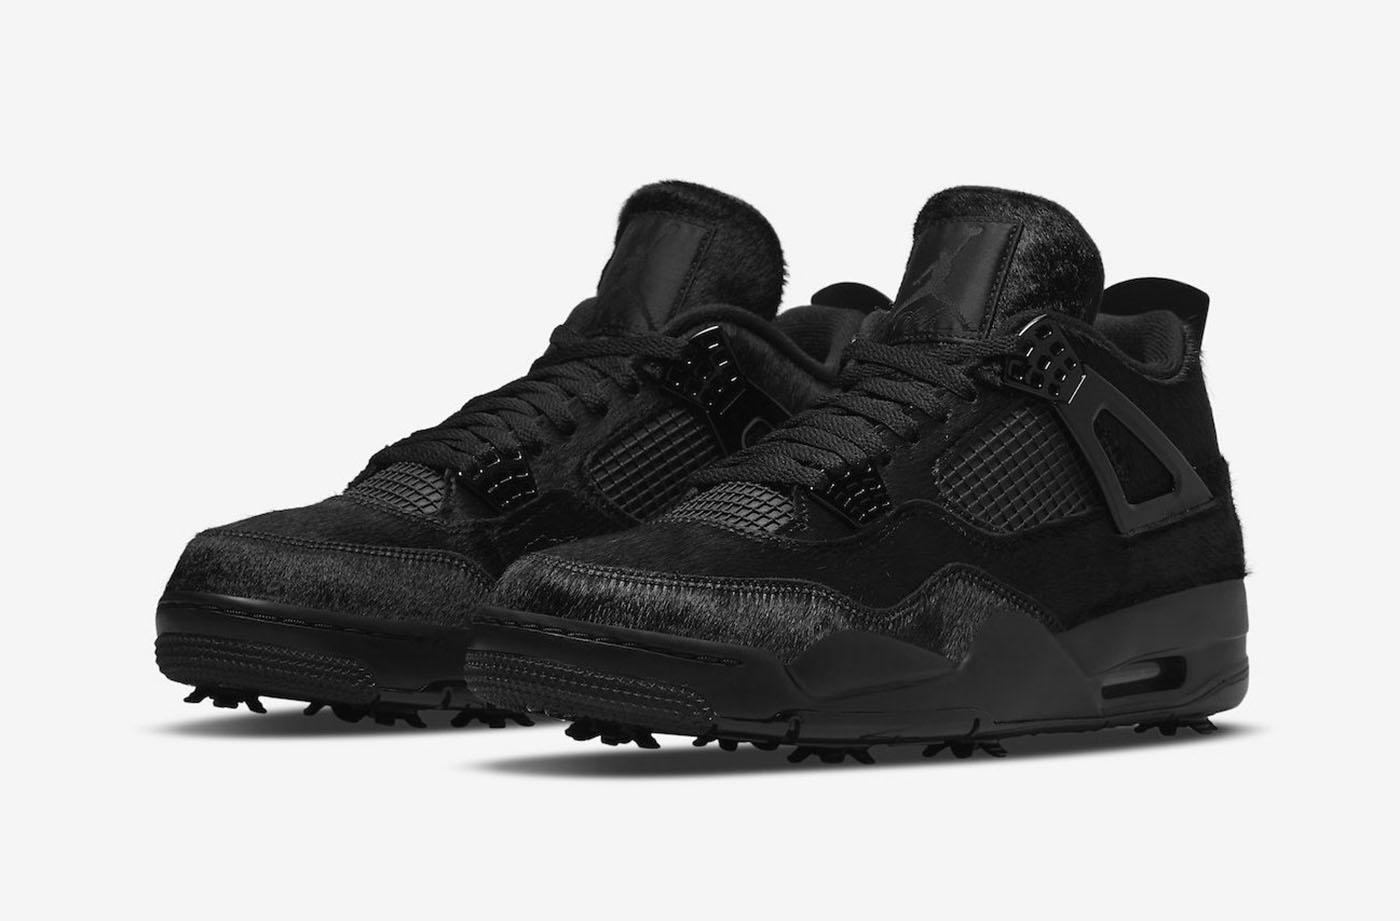 The Air Jordan 4 Black Cat Is Now Expected To Release In January •